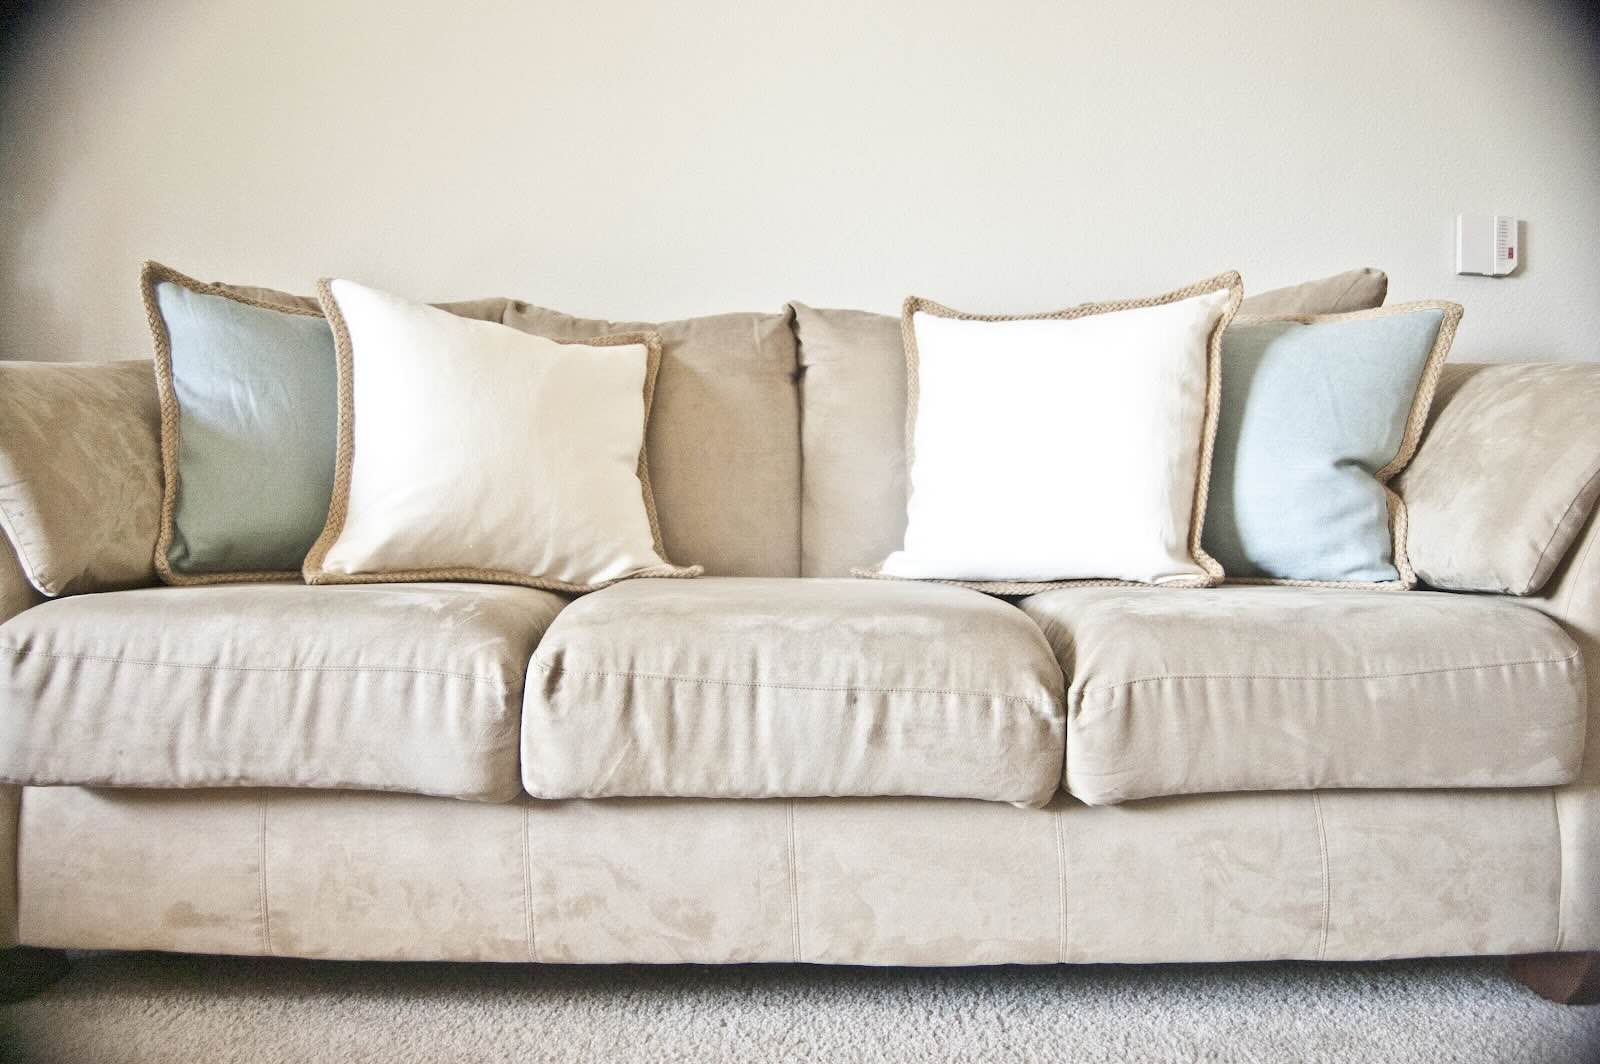 How Do You Clean Microfiber Couch Cushions